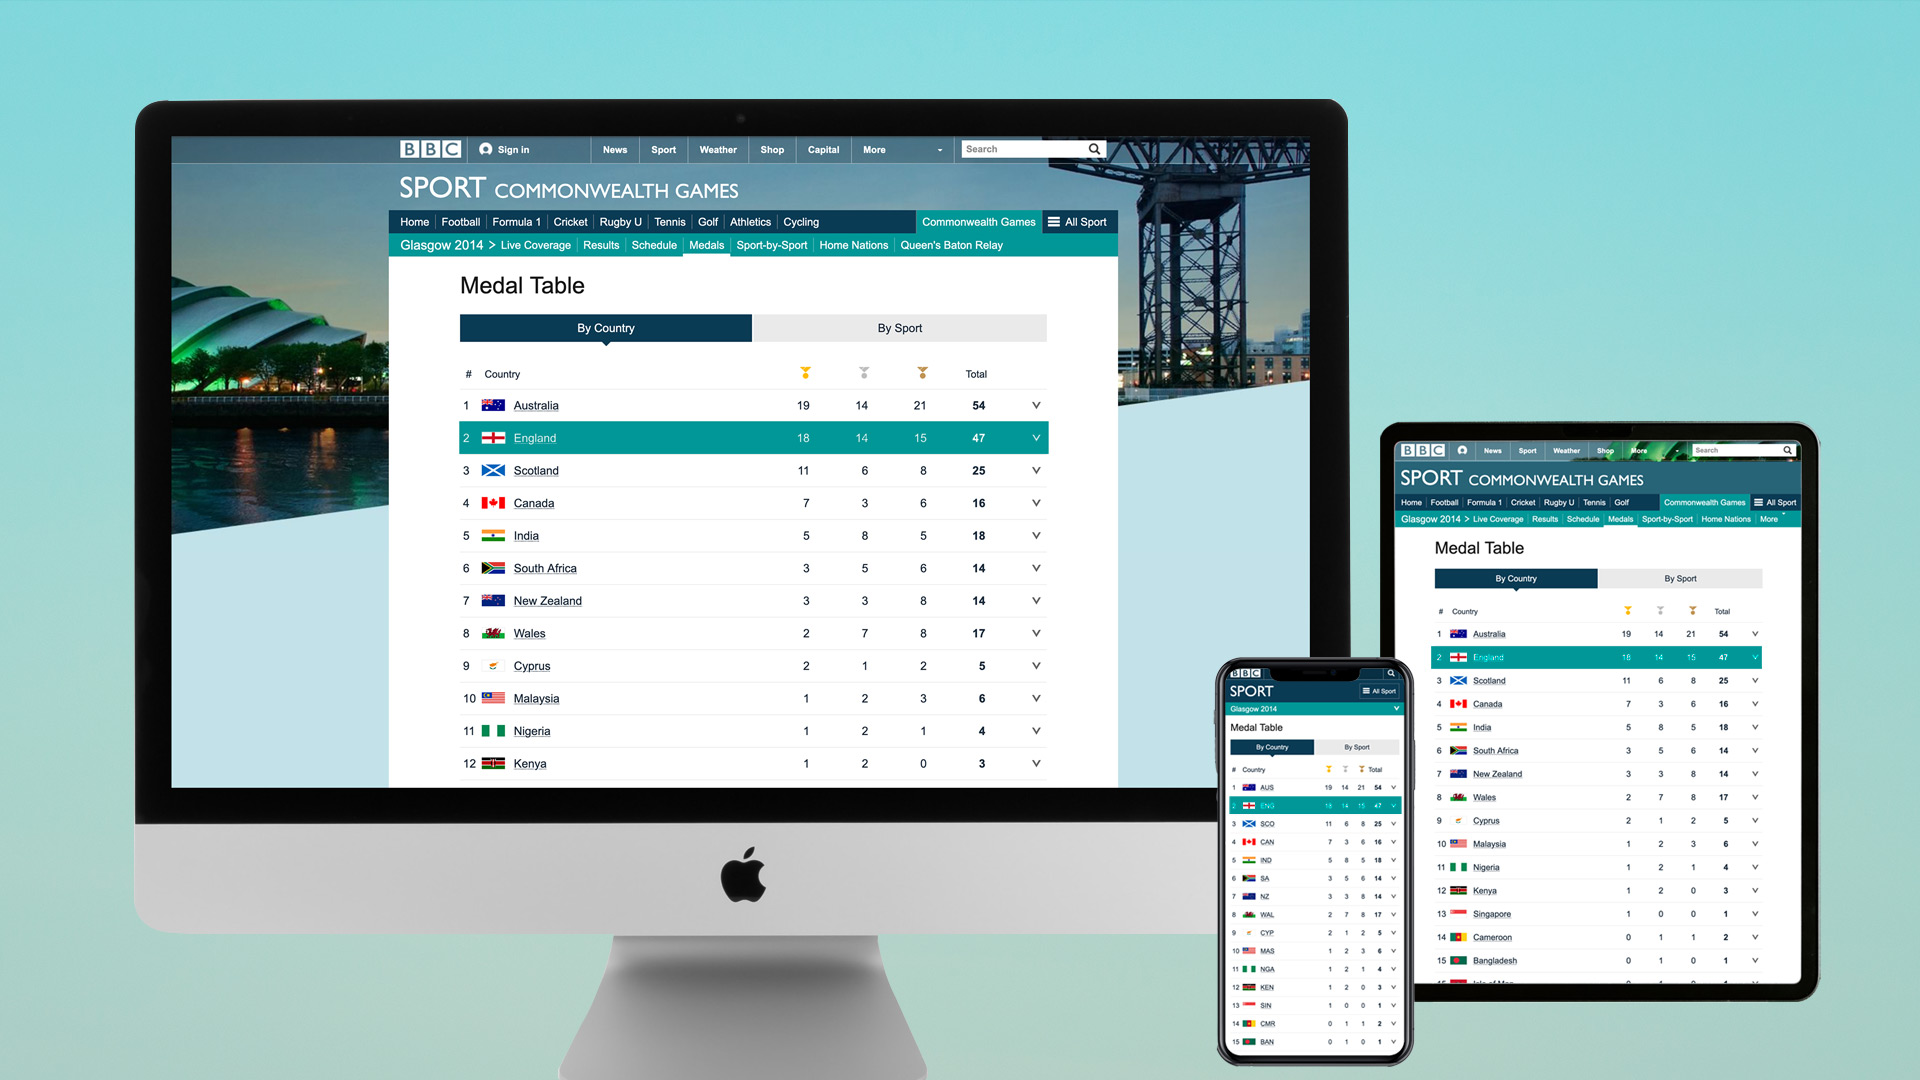 In the mockup, there are three devices displaying the responsive medal table. The iMac is placed on the left side, while the iPad is on the right. The third device, a mobile device, is positioned in front of the other two. The mockup background has a turquoise colour.